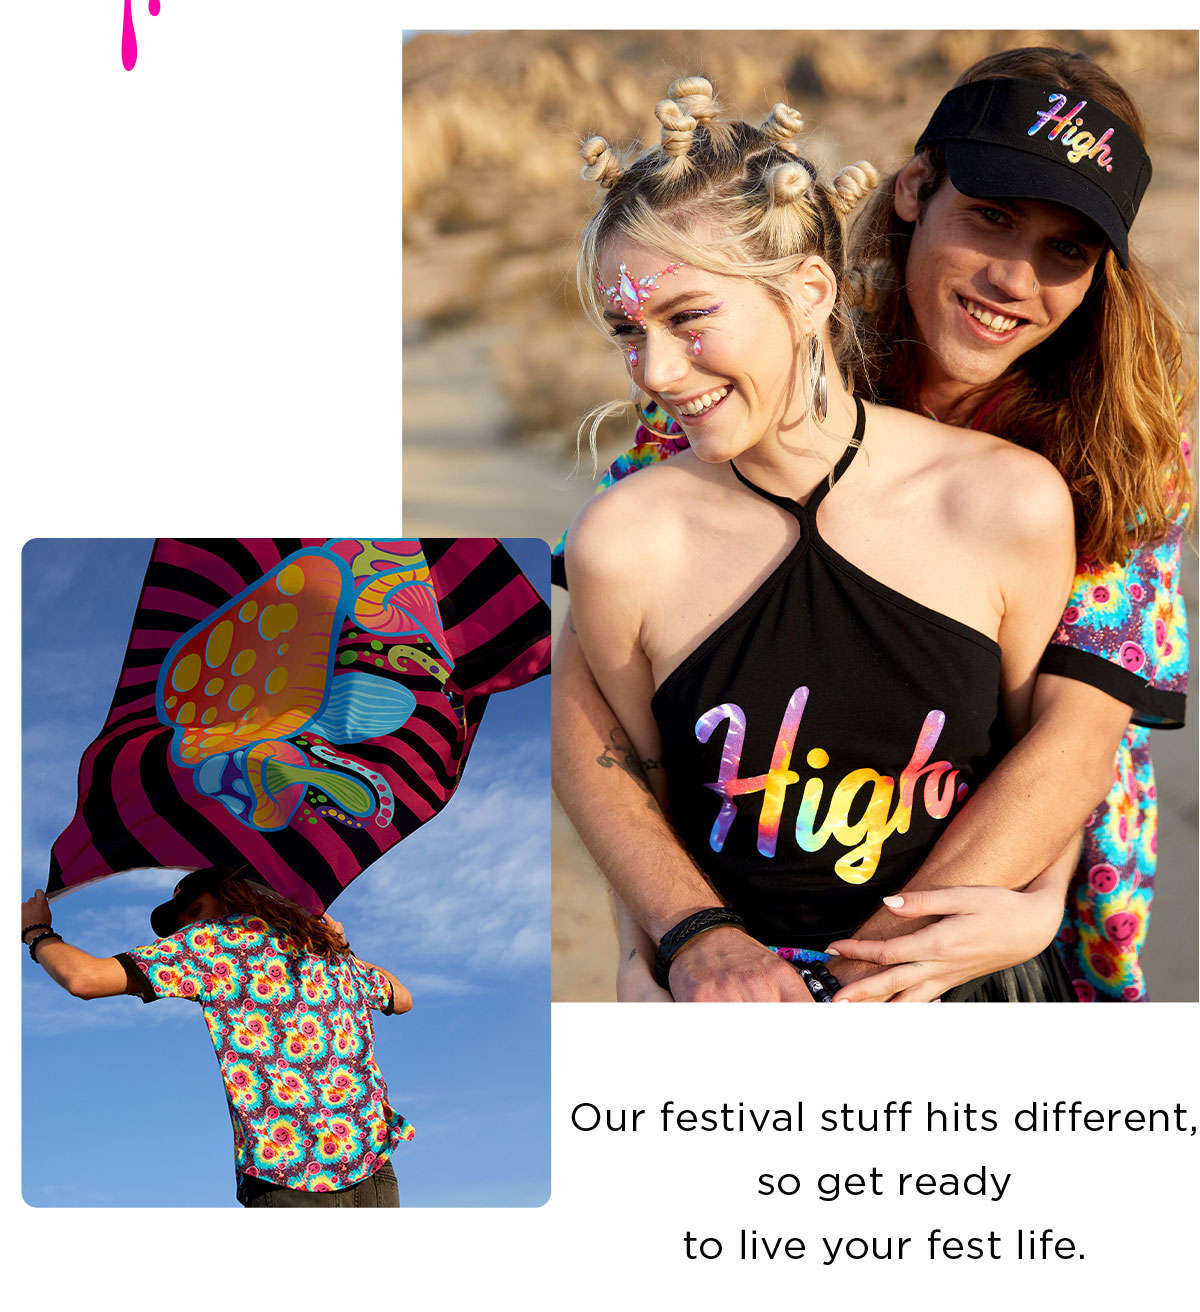 Our festival stuff hits different so get ready to live your fest life